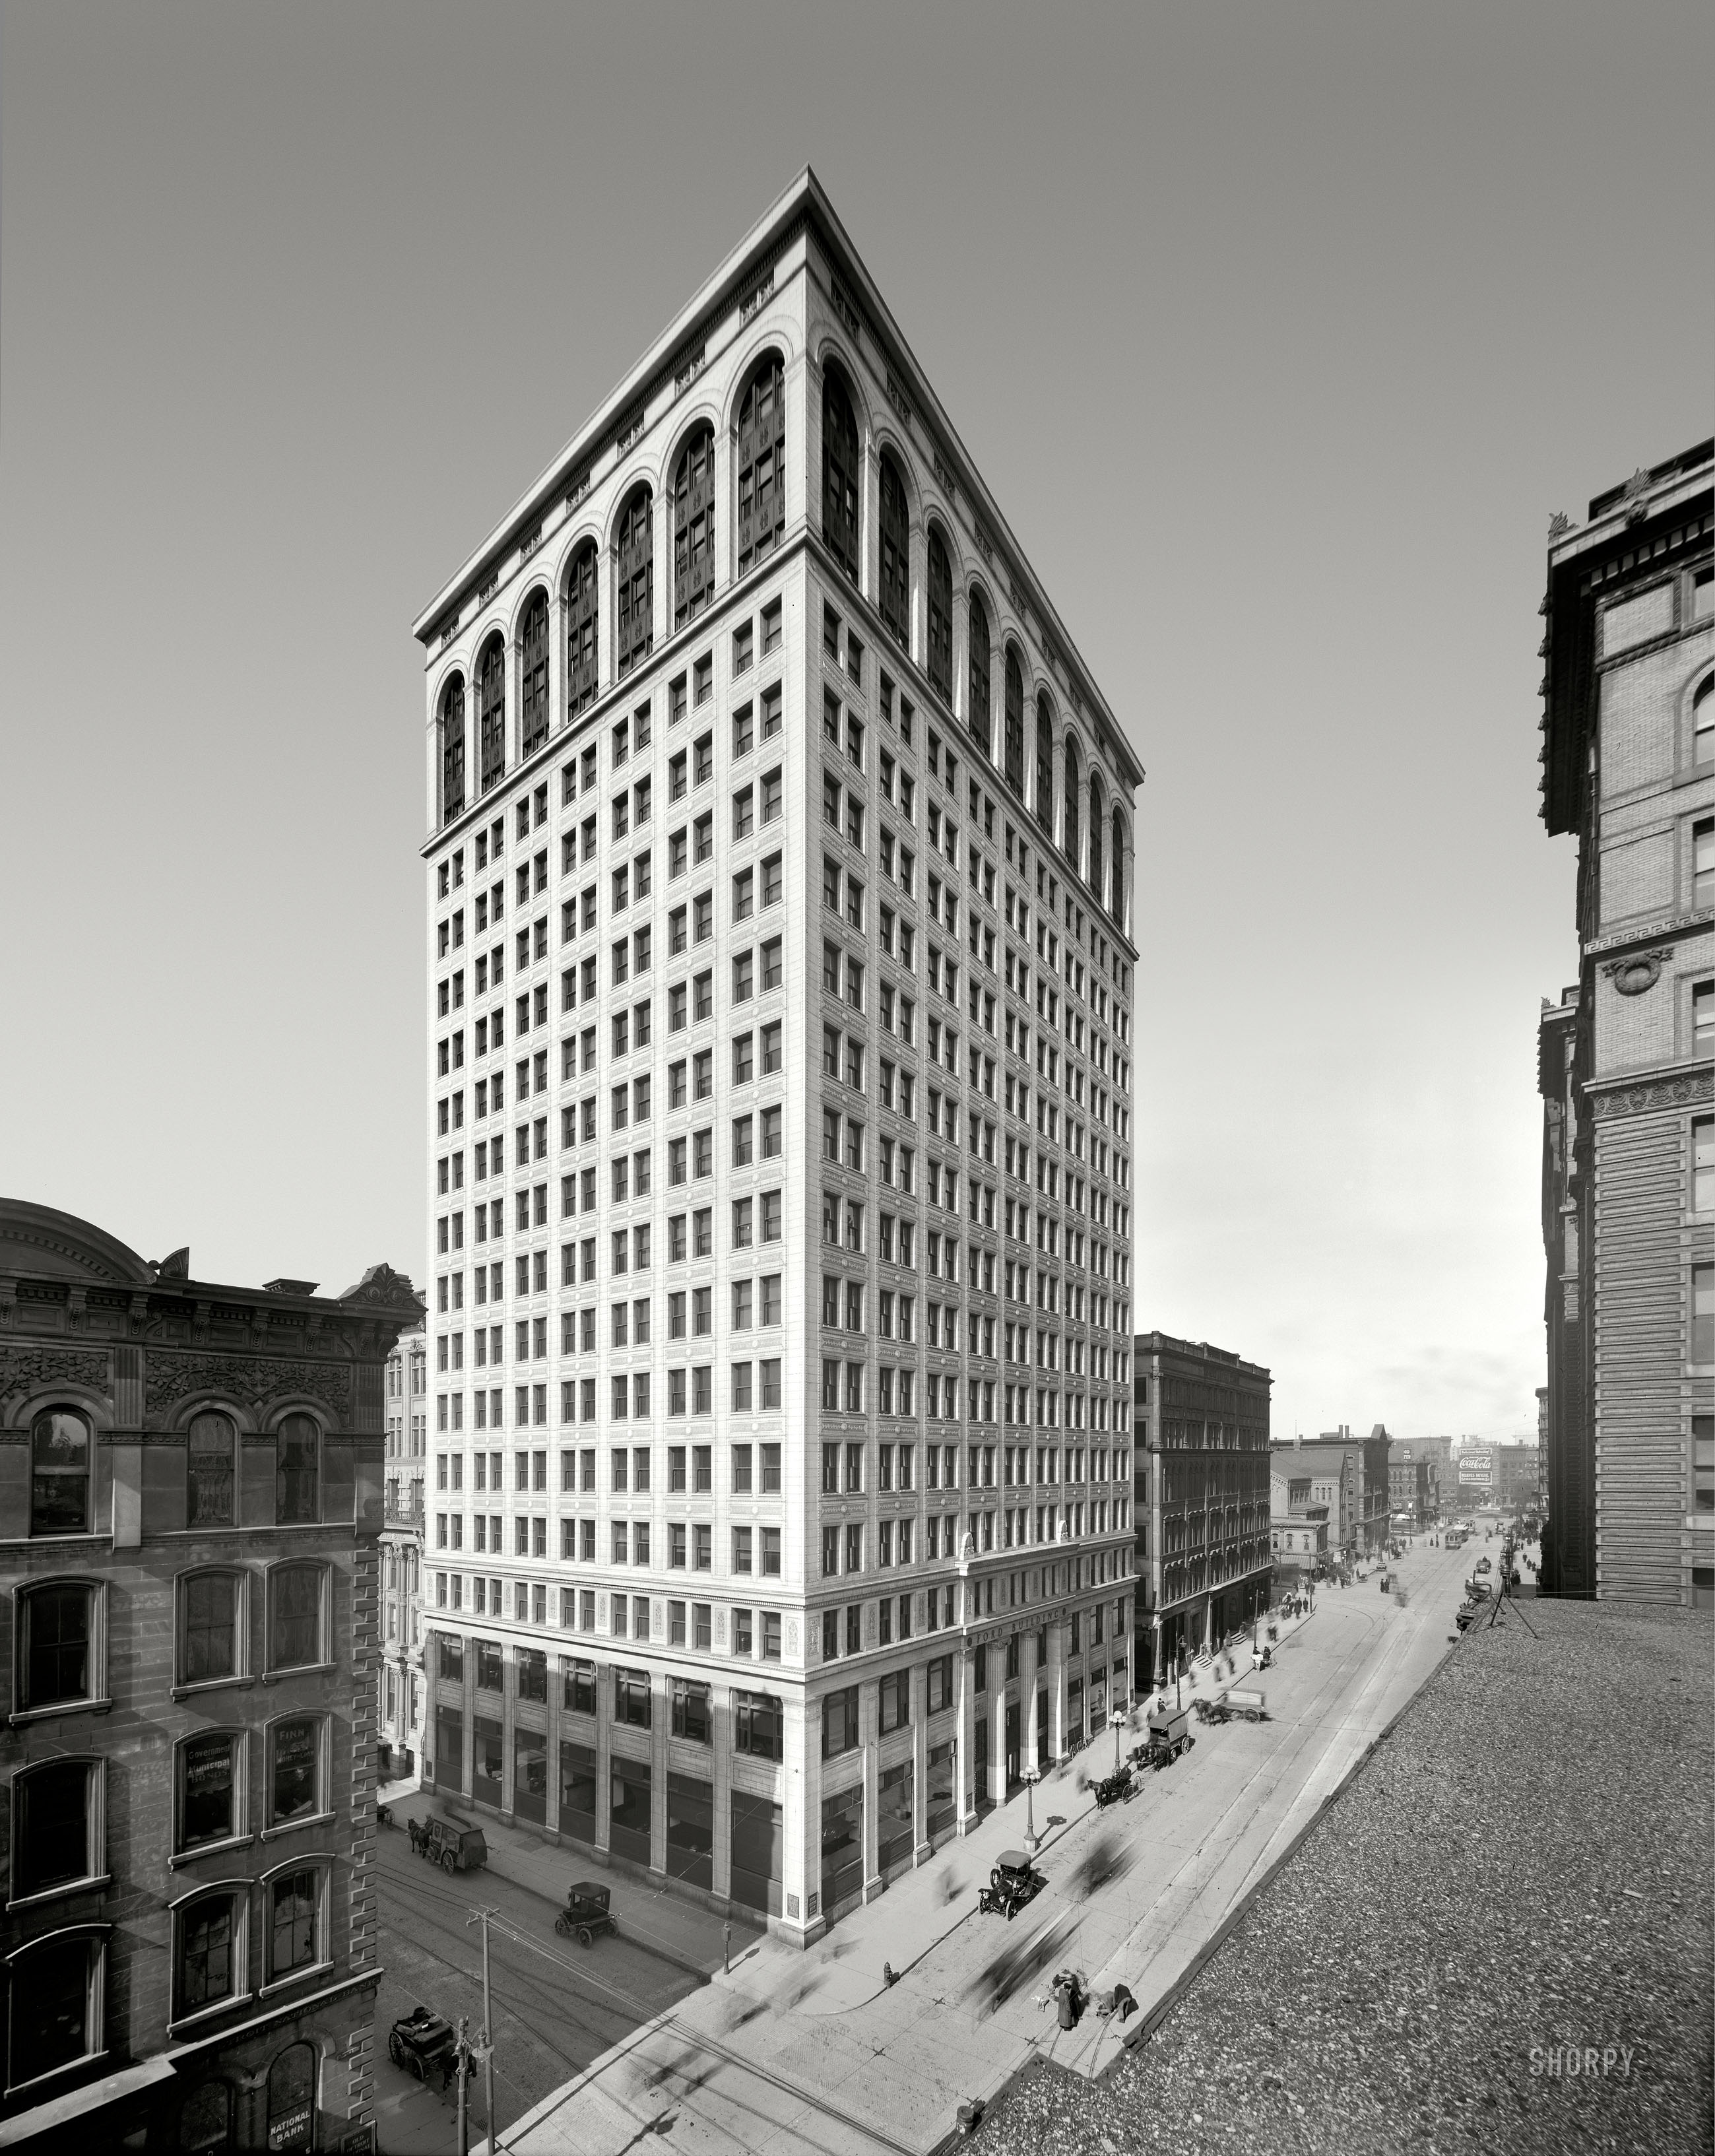 Circa 1910, another Detroit landmark. "Ford Sales Office, Griswold Street." 8x10 inch dry plate glass negative, Detroit Publishing Company. View full size.